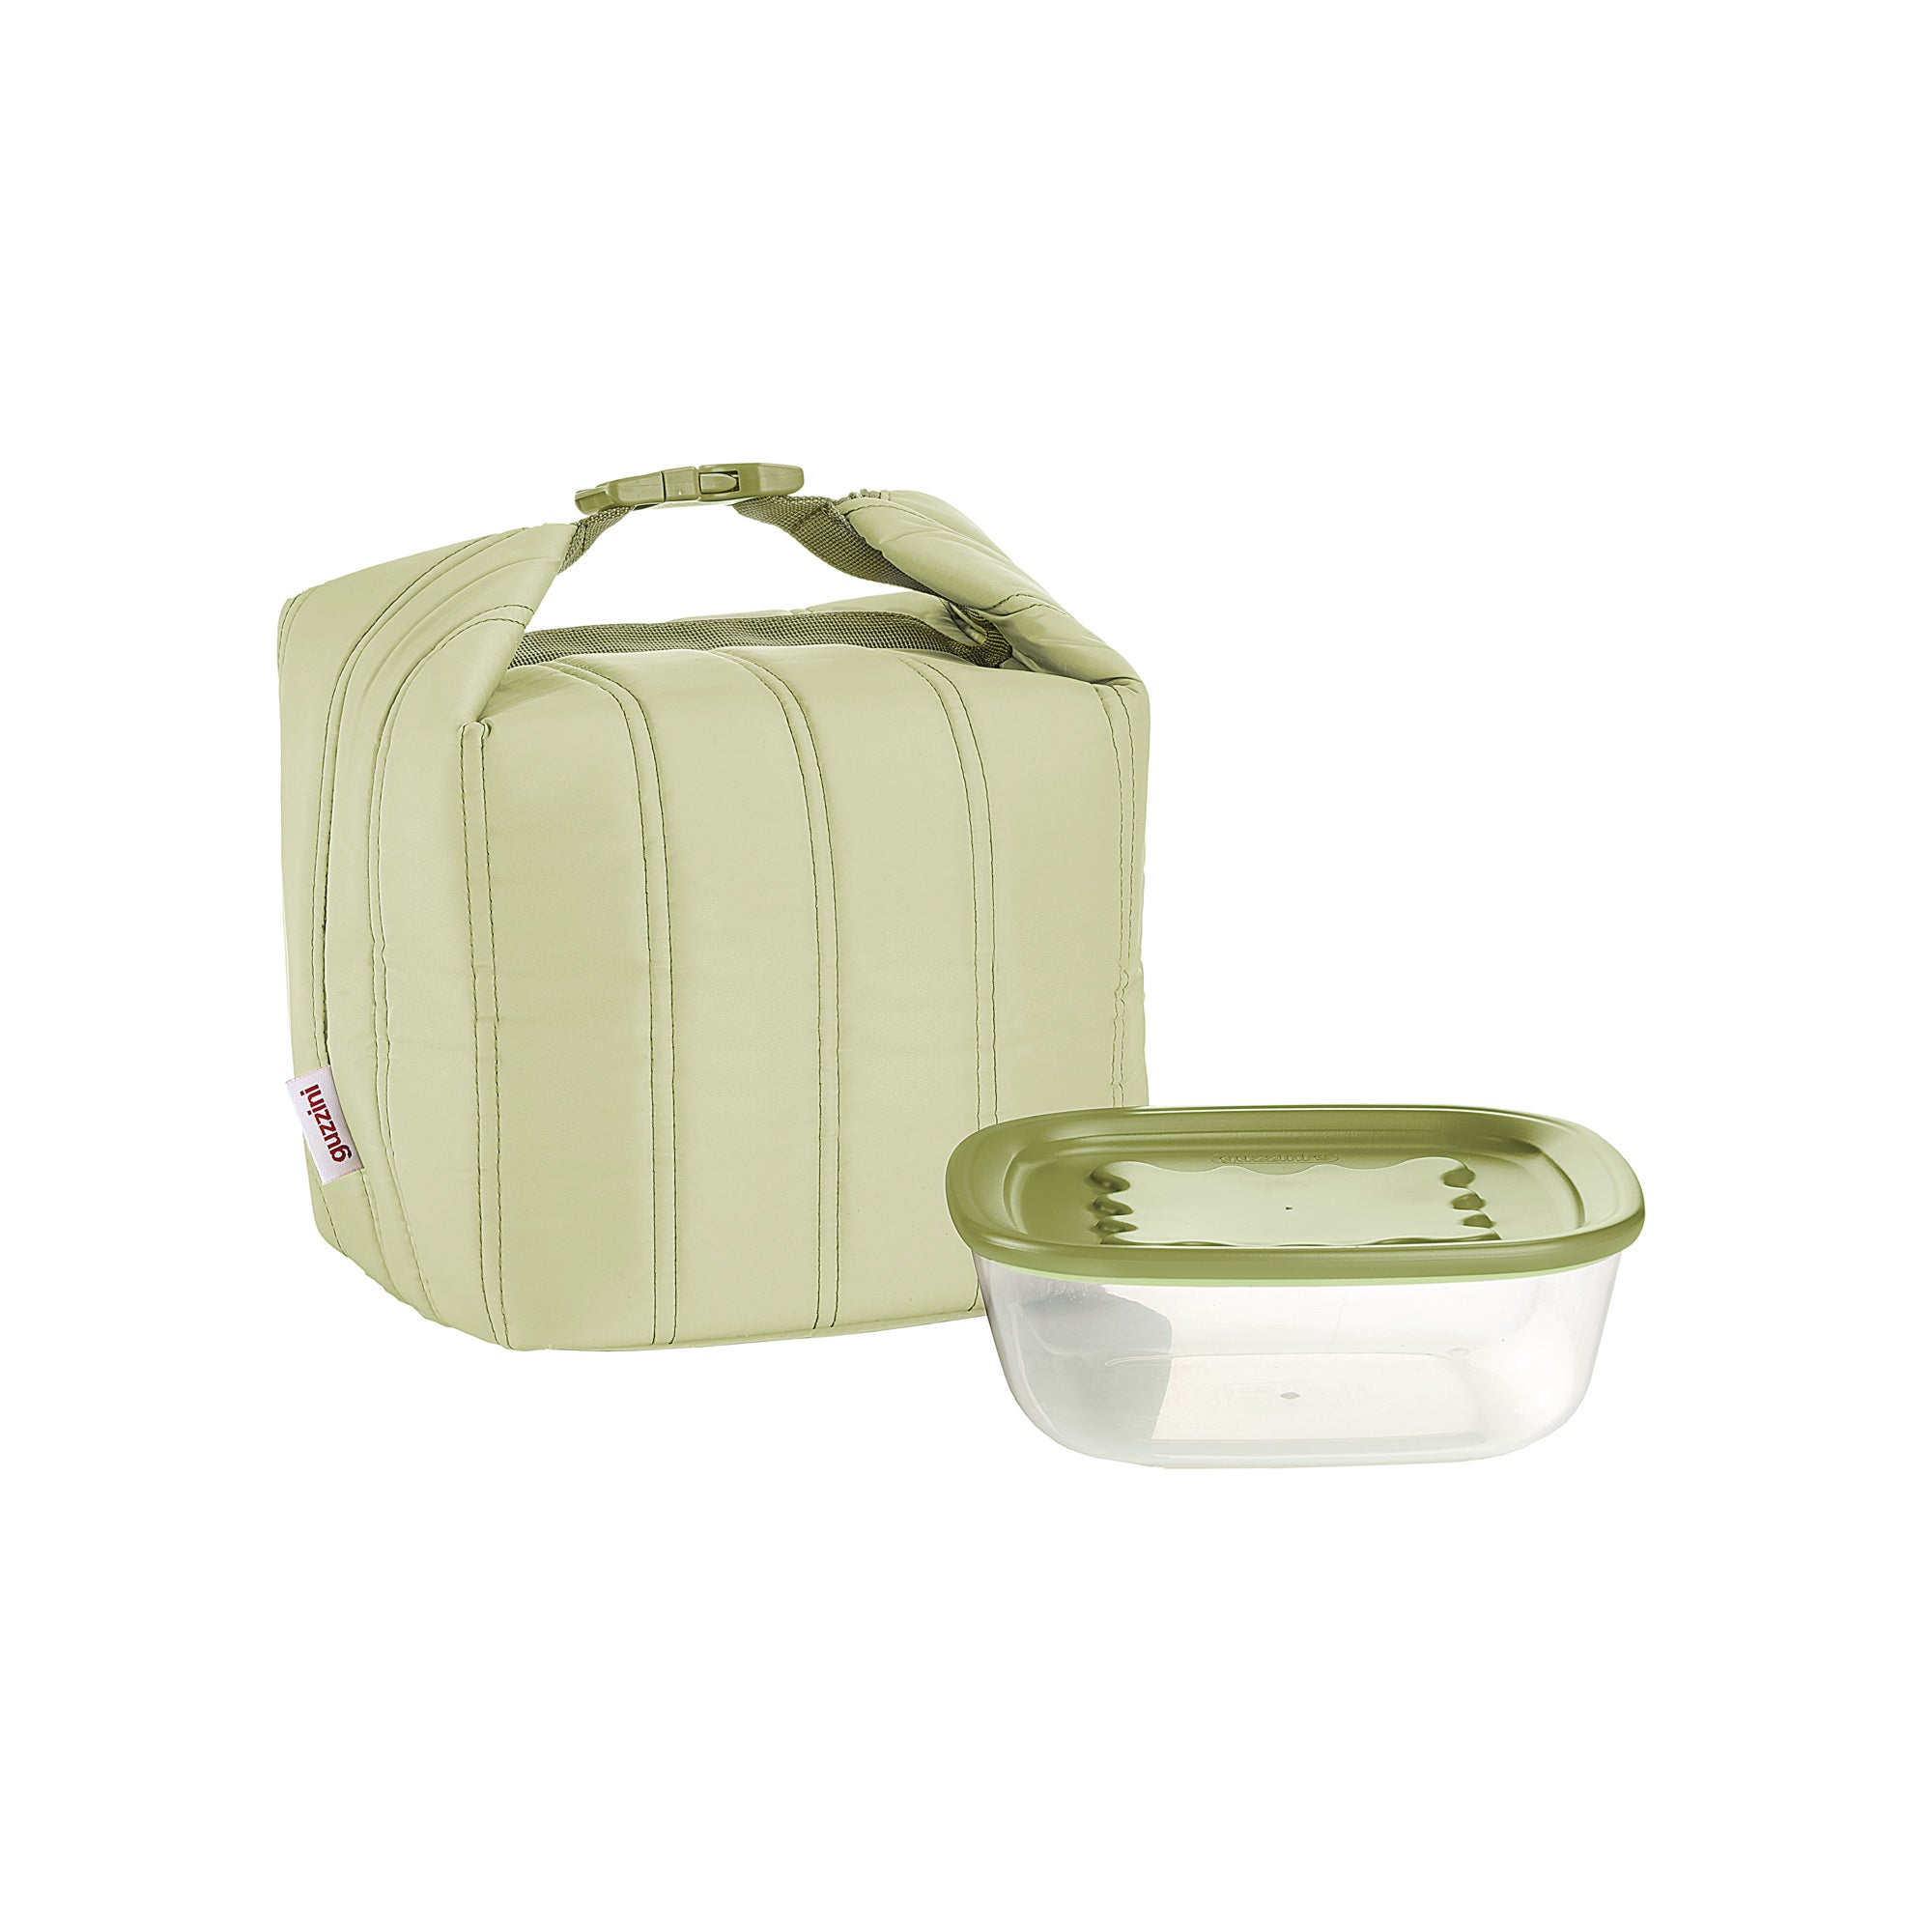 THERMAL BAG AND AIRTIGHT CONTAINER SET 'HANDY BIO' "ON THE GO"